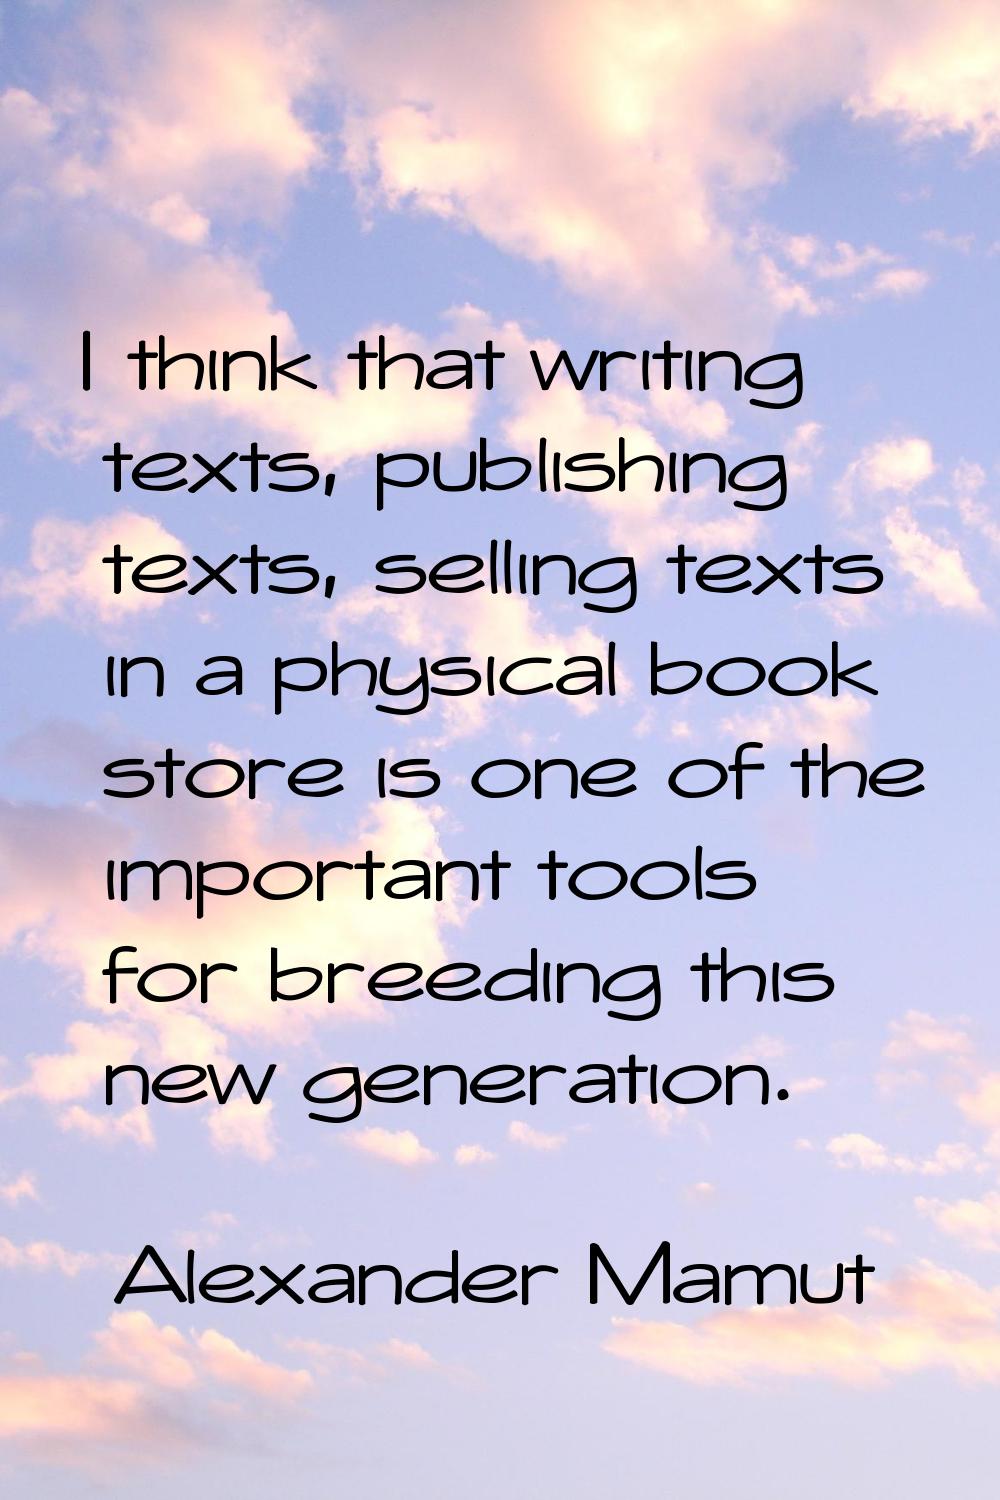 I think that writing texts, publishing texts, selling texts in a physical book store is one of the 